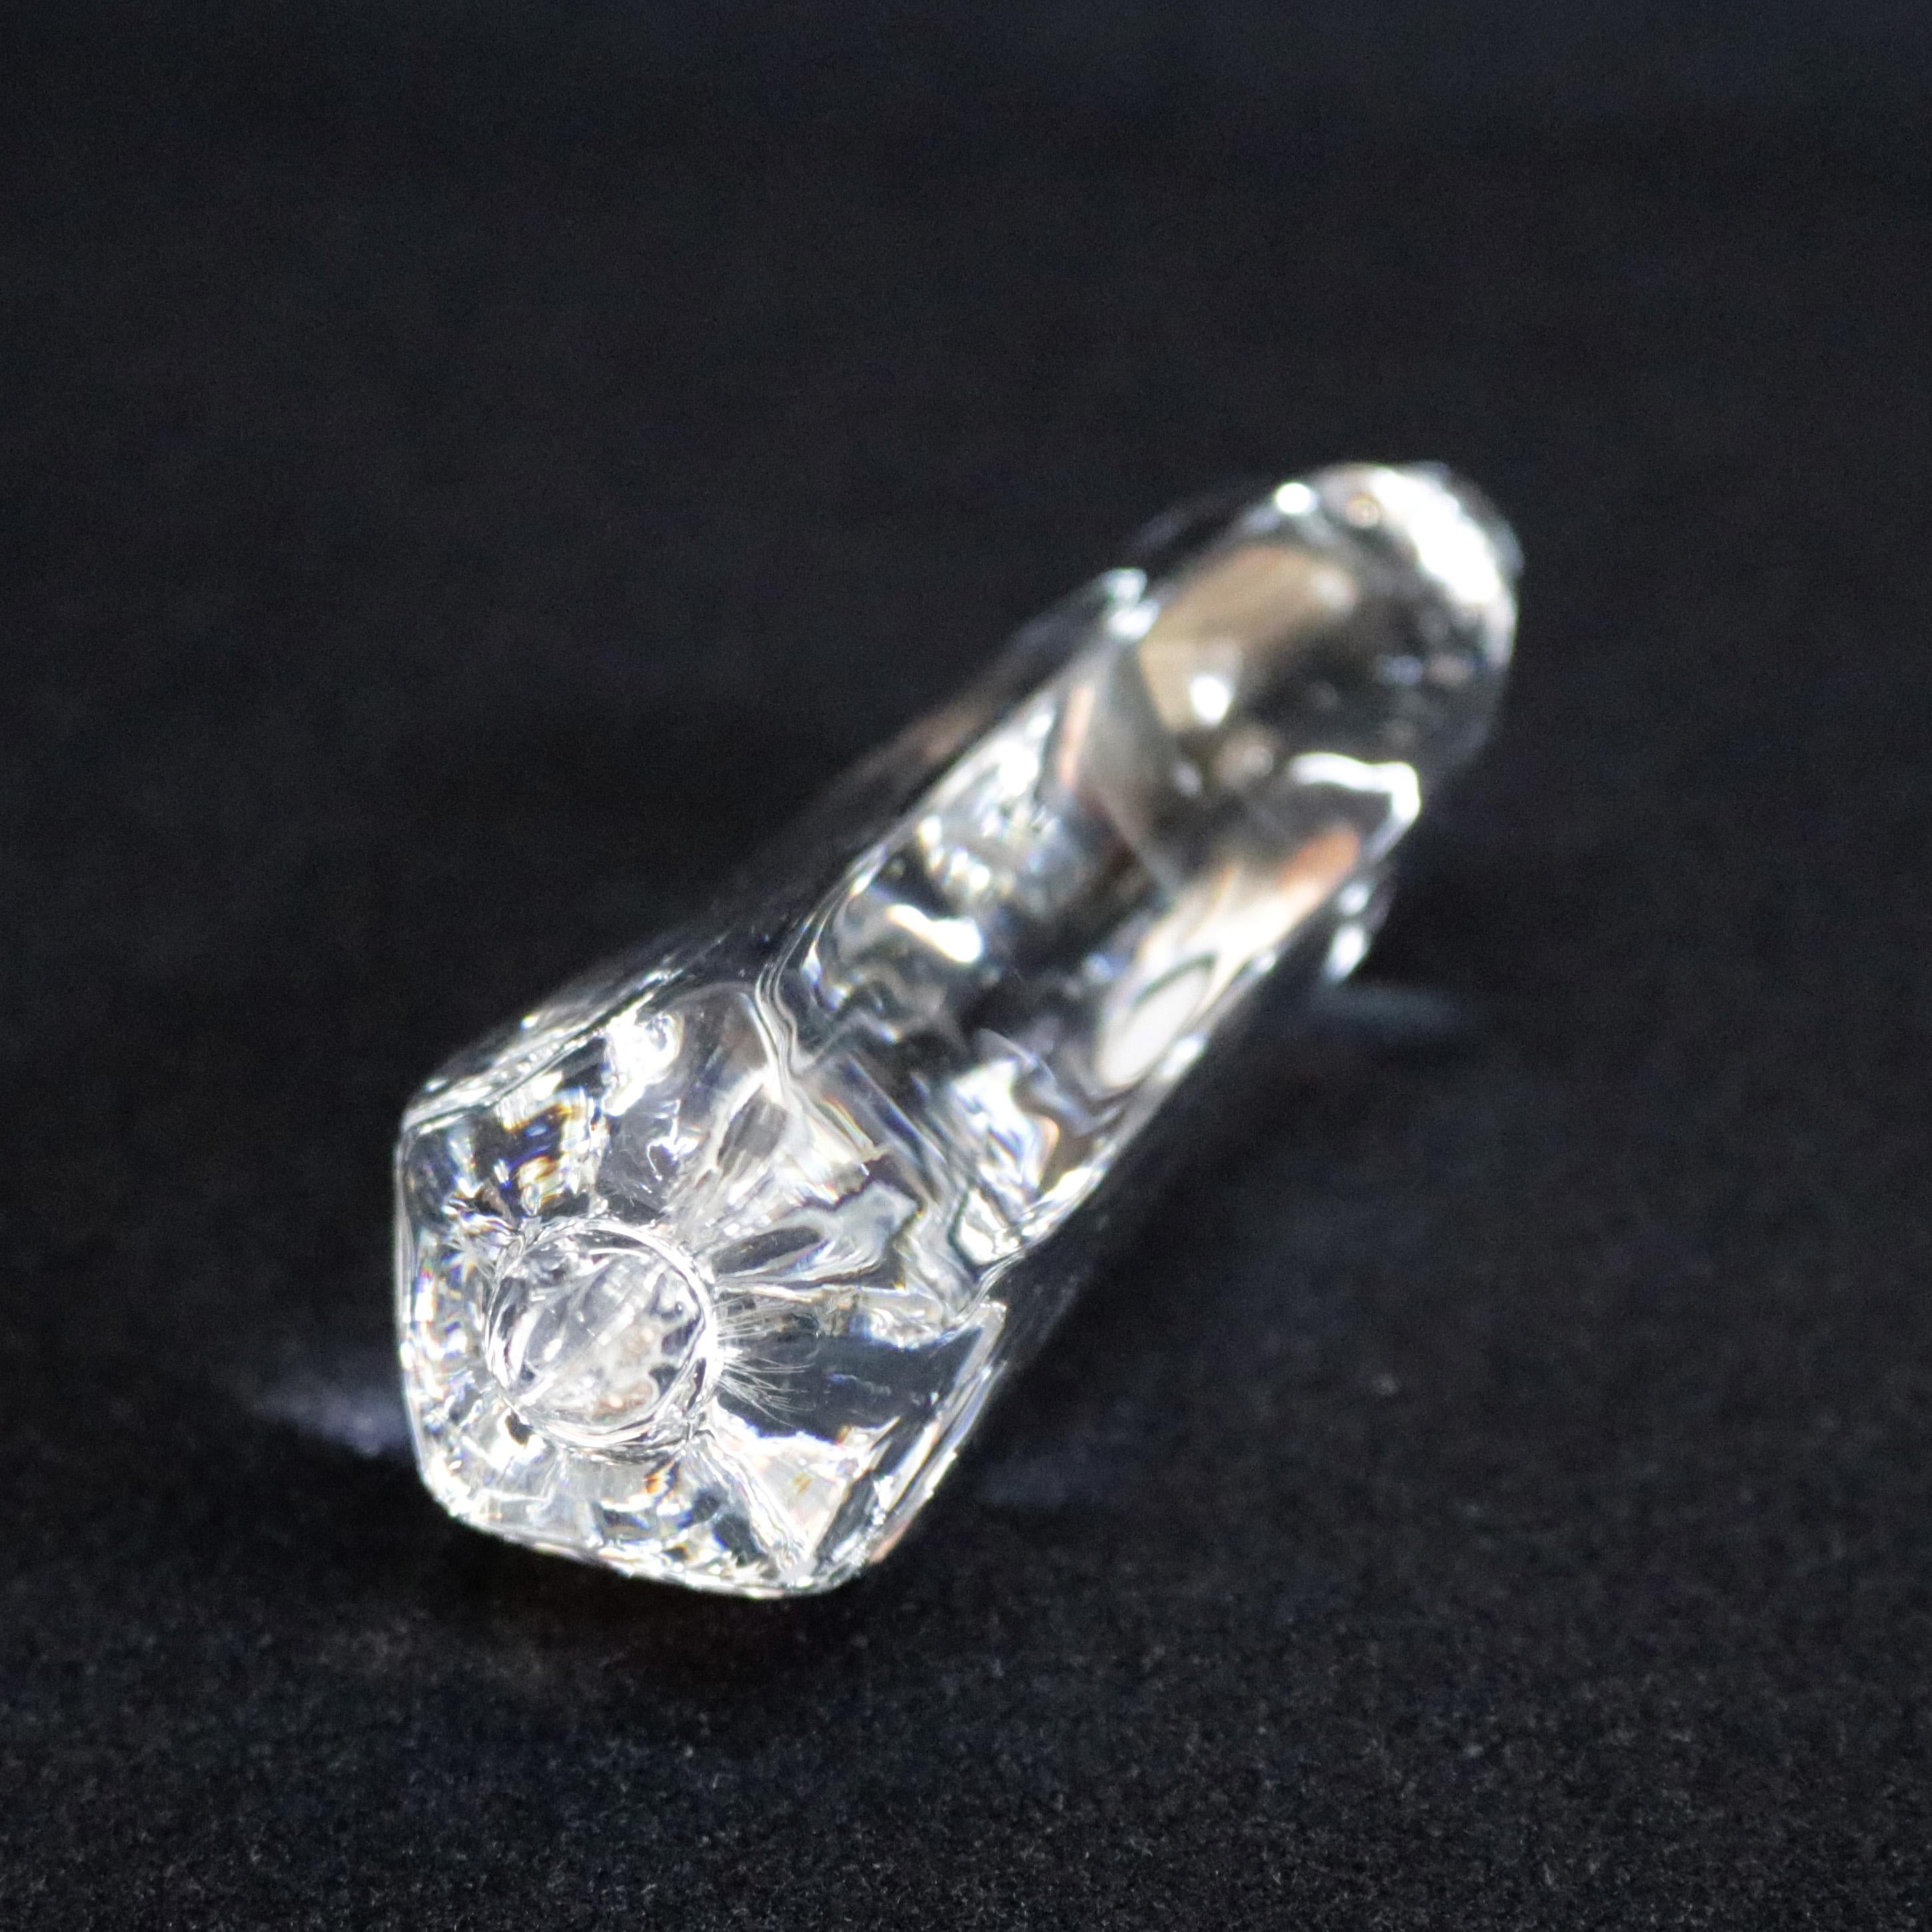 Mid-Century Modern Steuben Figurative Crystal Fruit Sculpture Paperweight of Banana, Signed